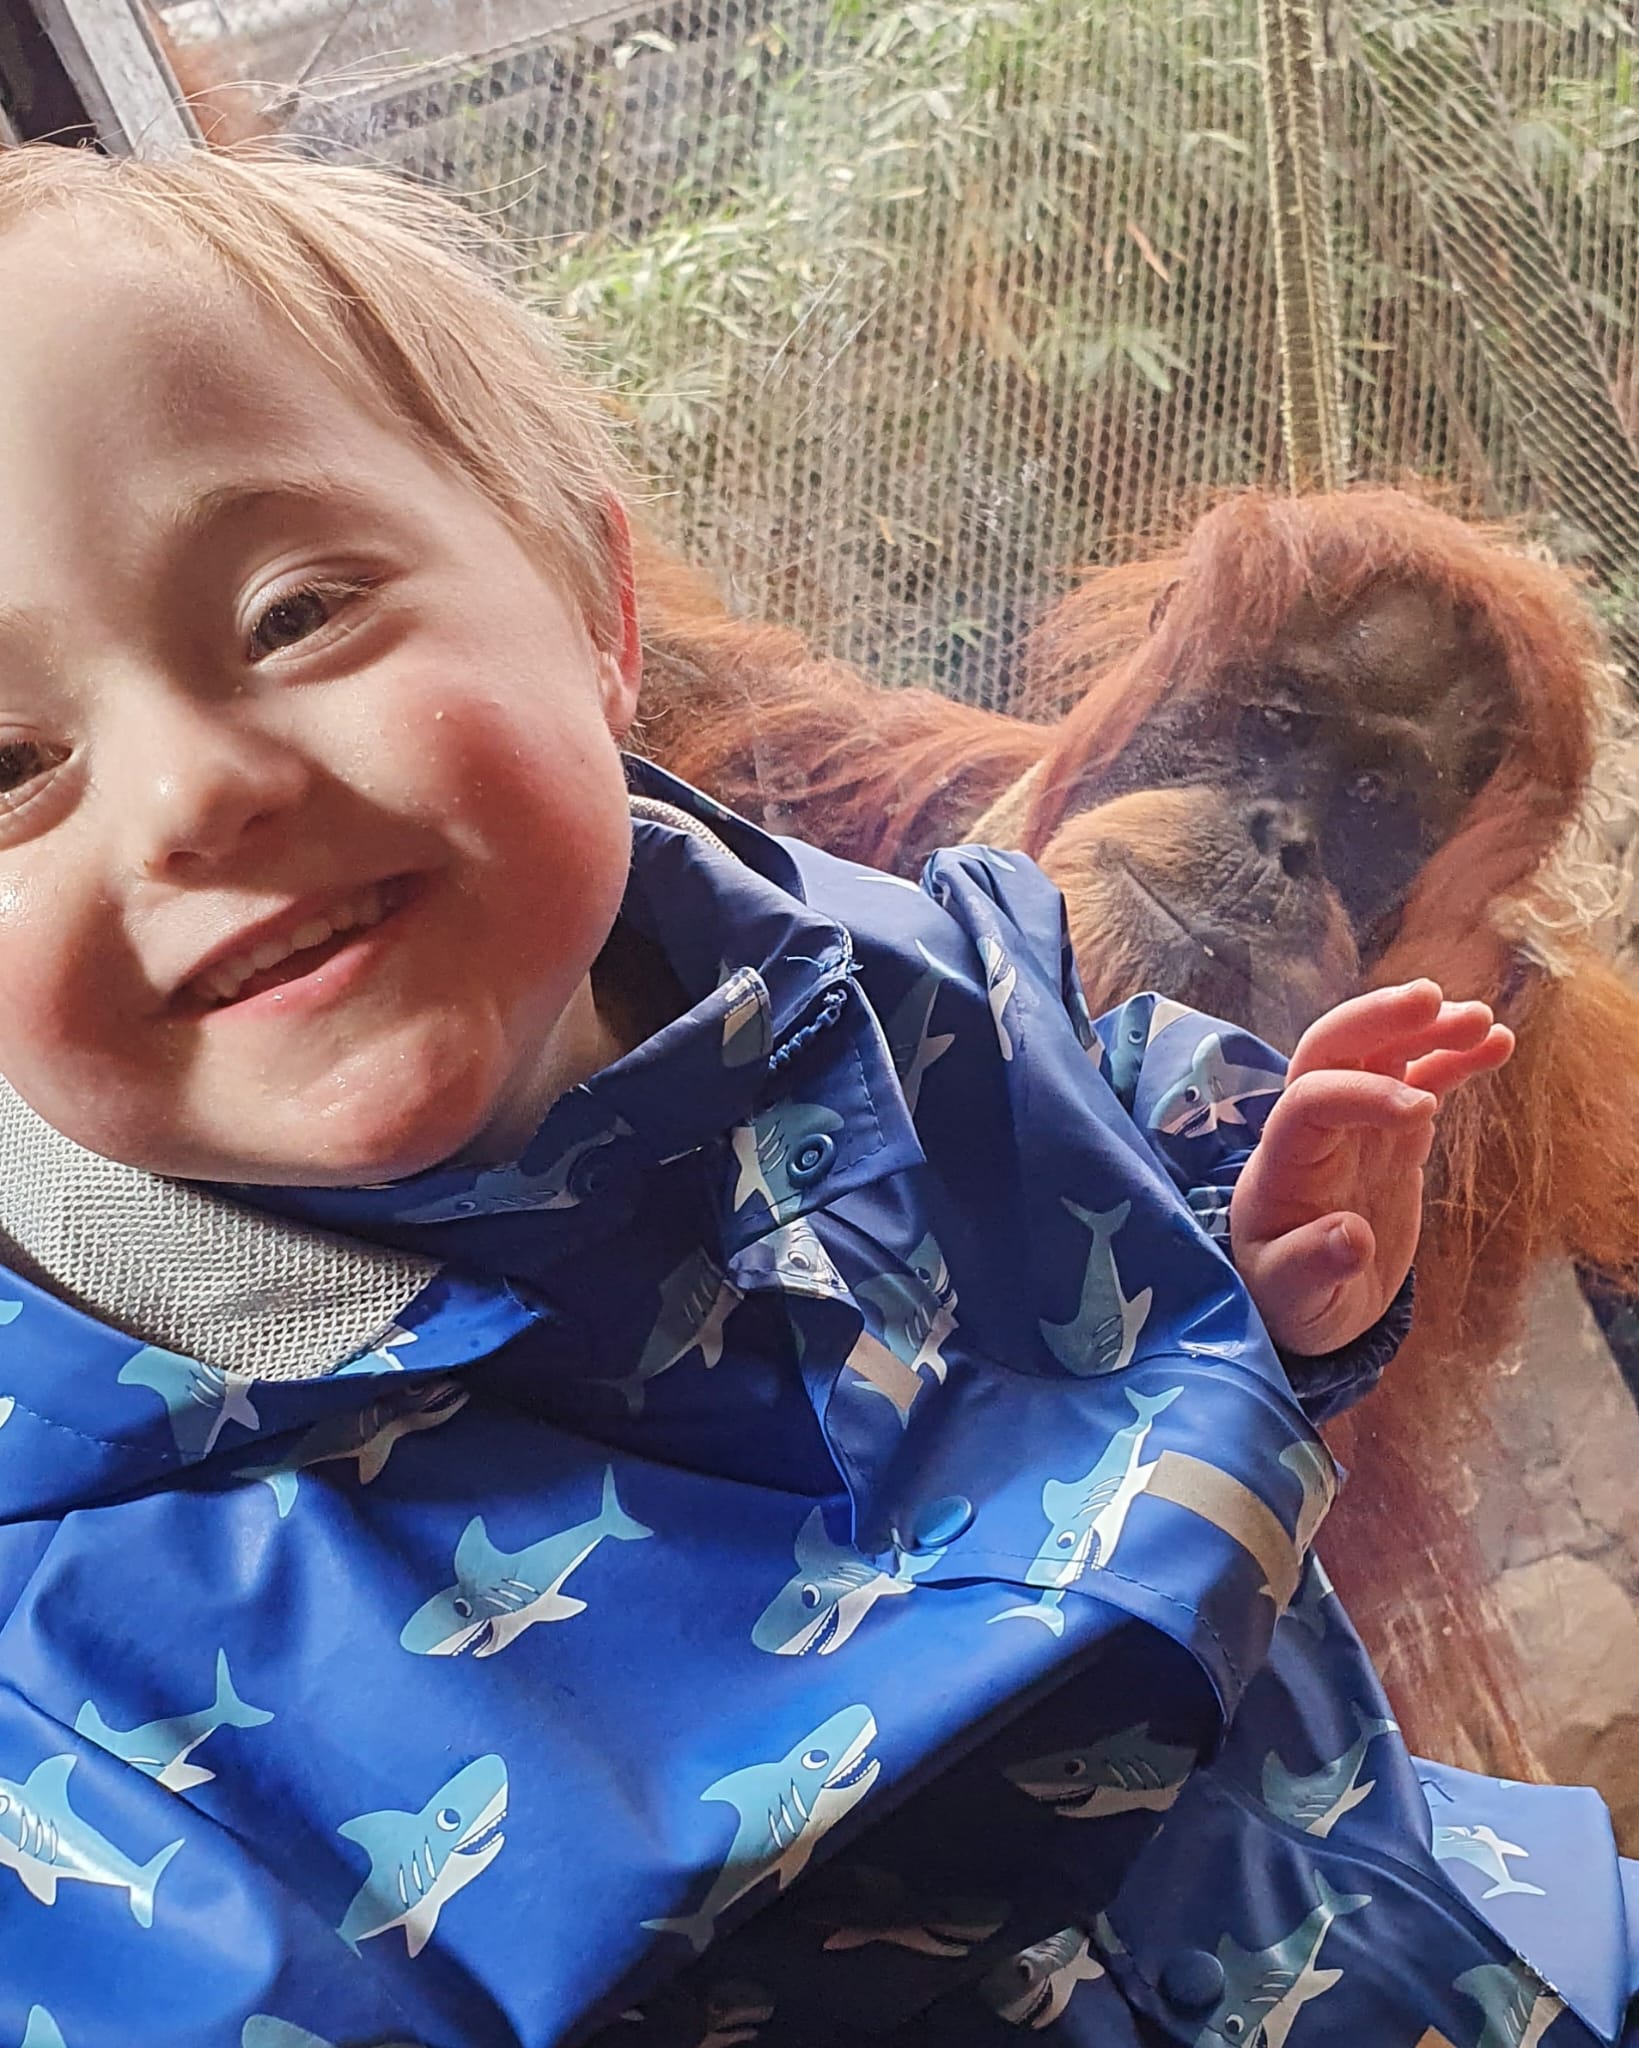 This is an image of a child with Down Syndrome stood in front of an orangutang at Chester Zoo.